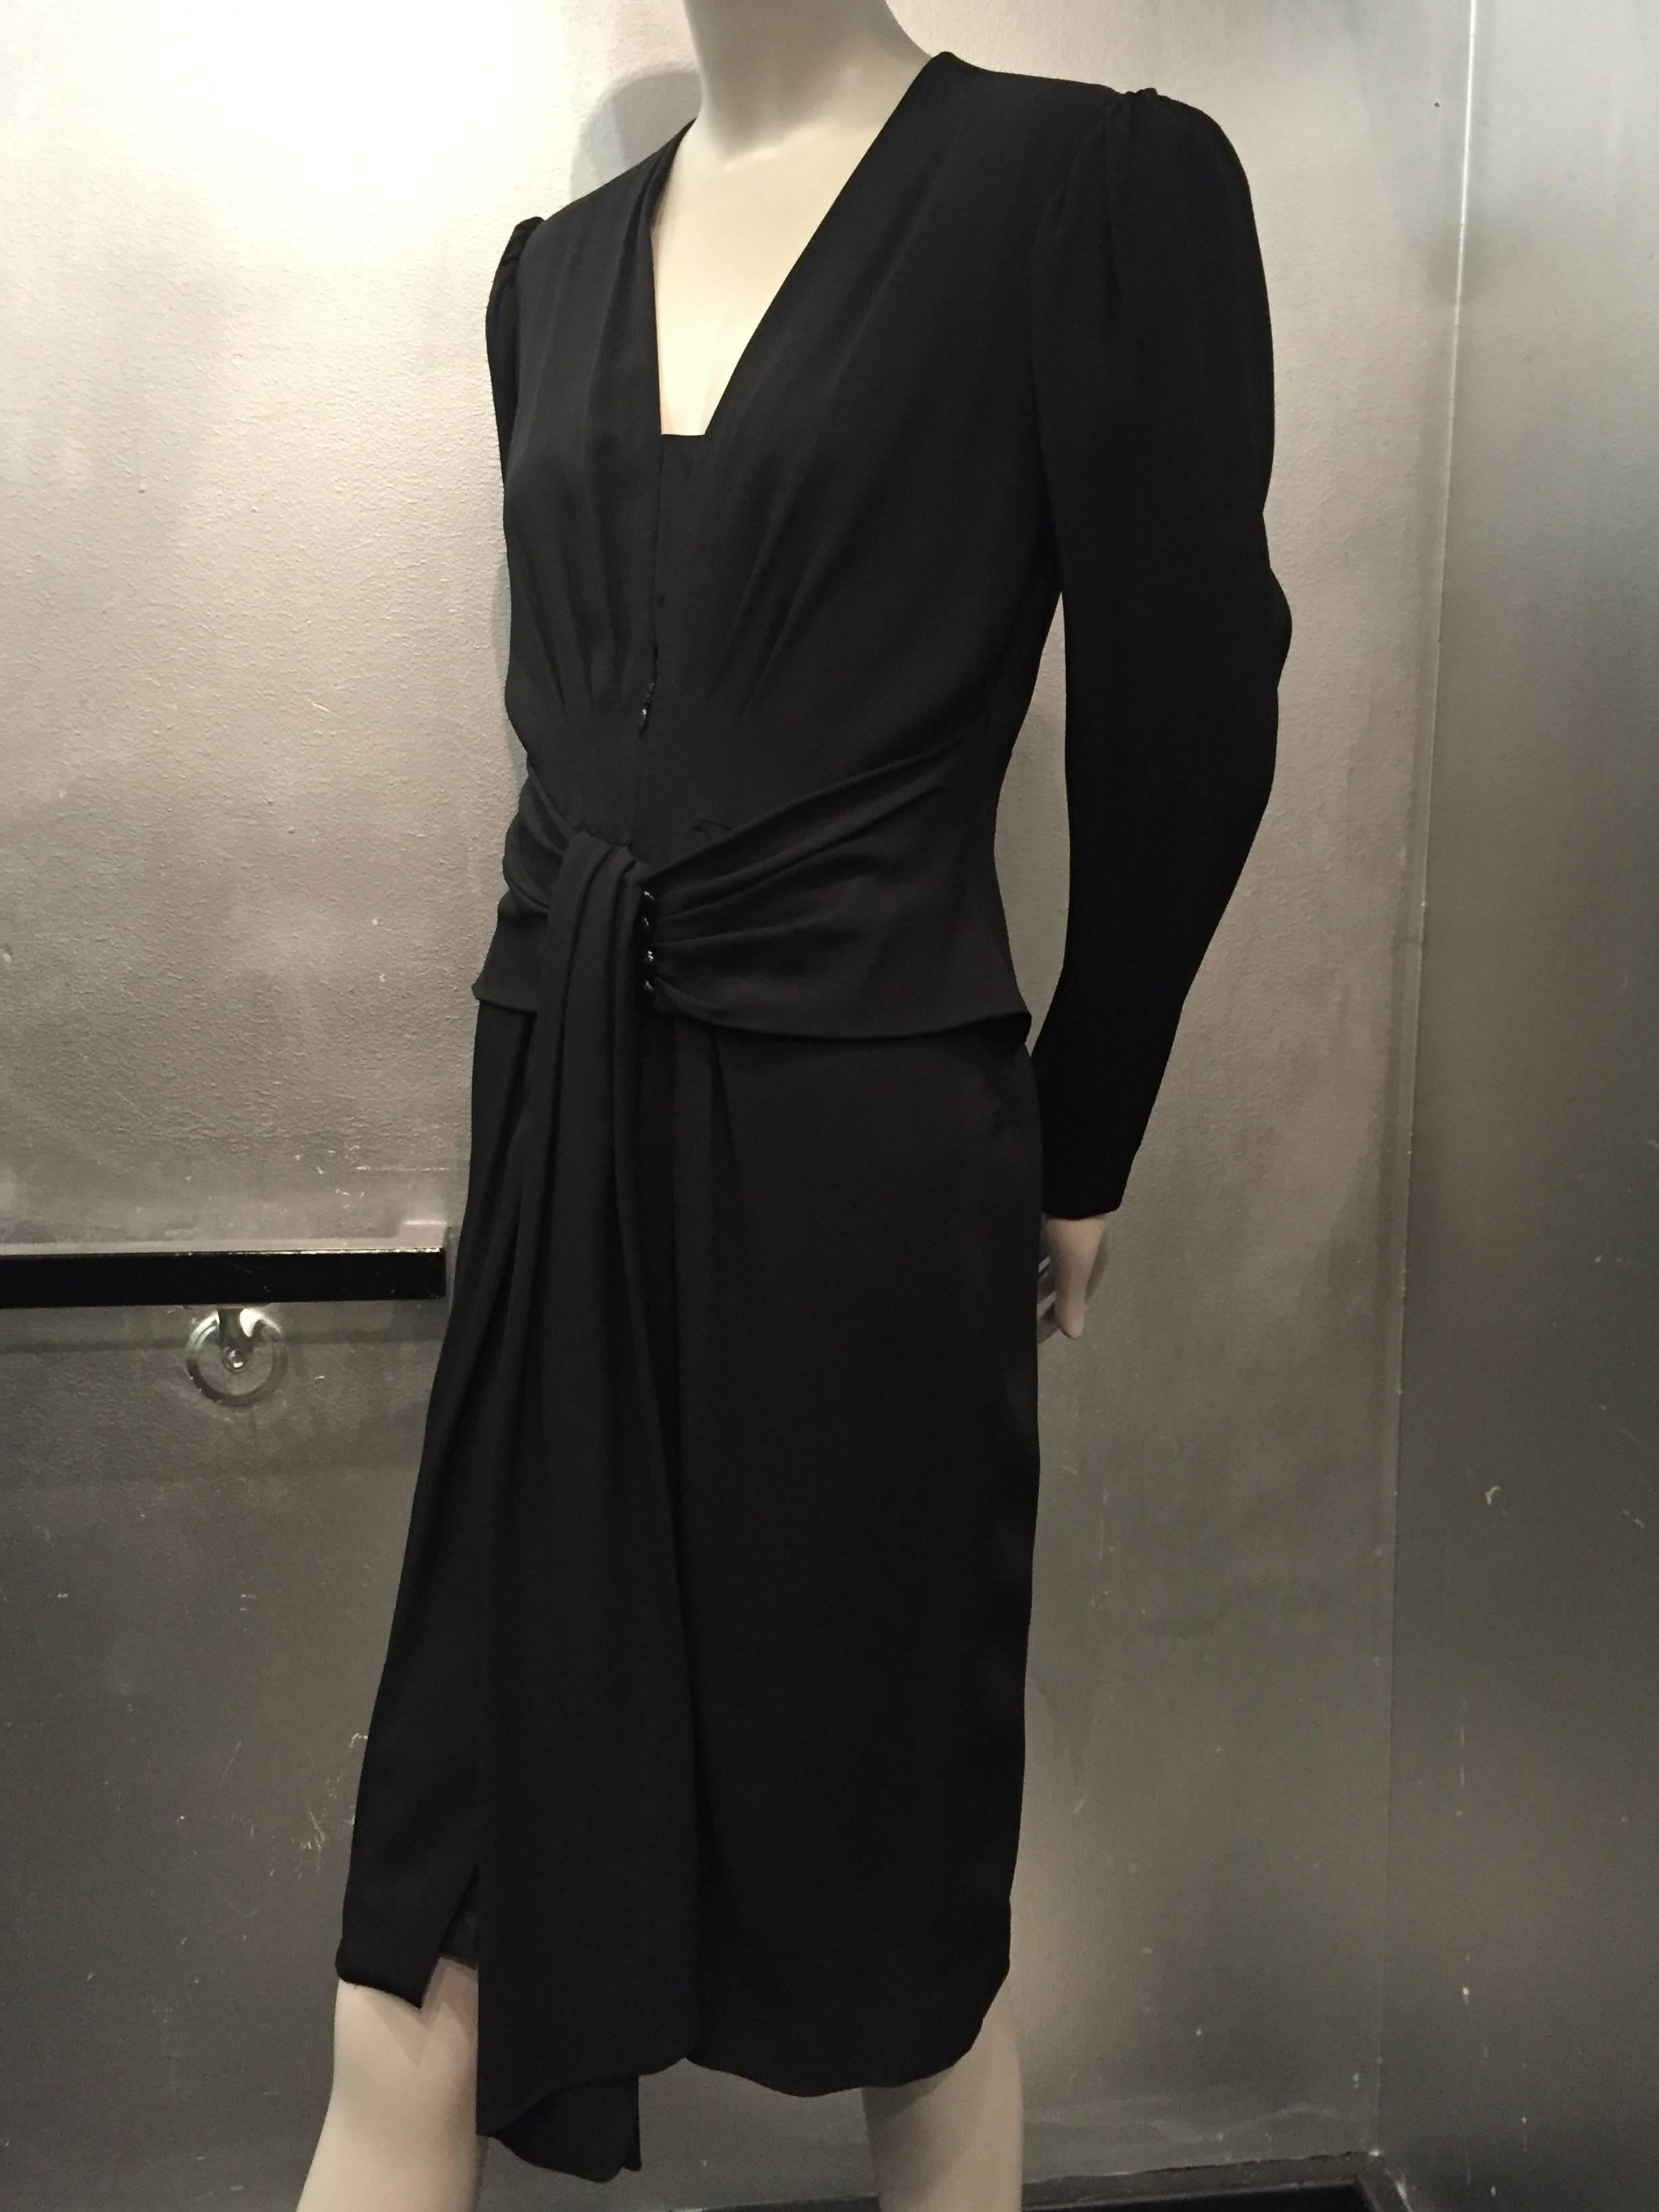 Women's 1980s Ted Lapidus Black Crepe Cocktail Dress w/ 1940s-Inspired Style